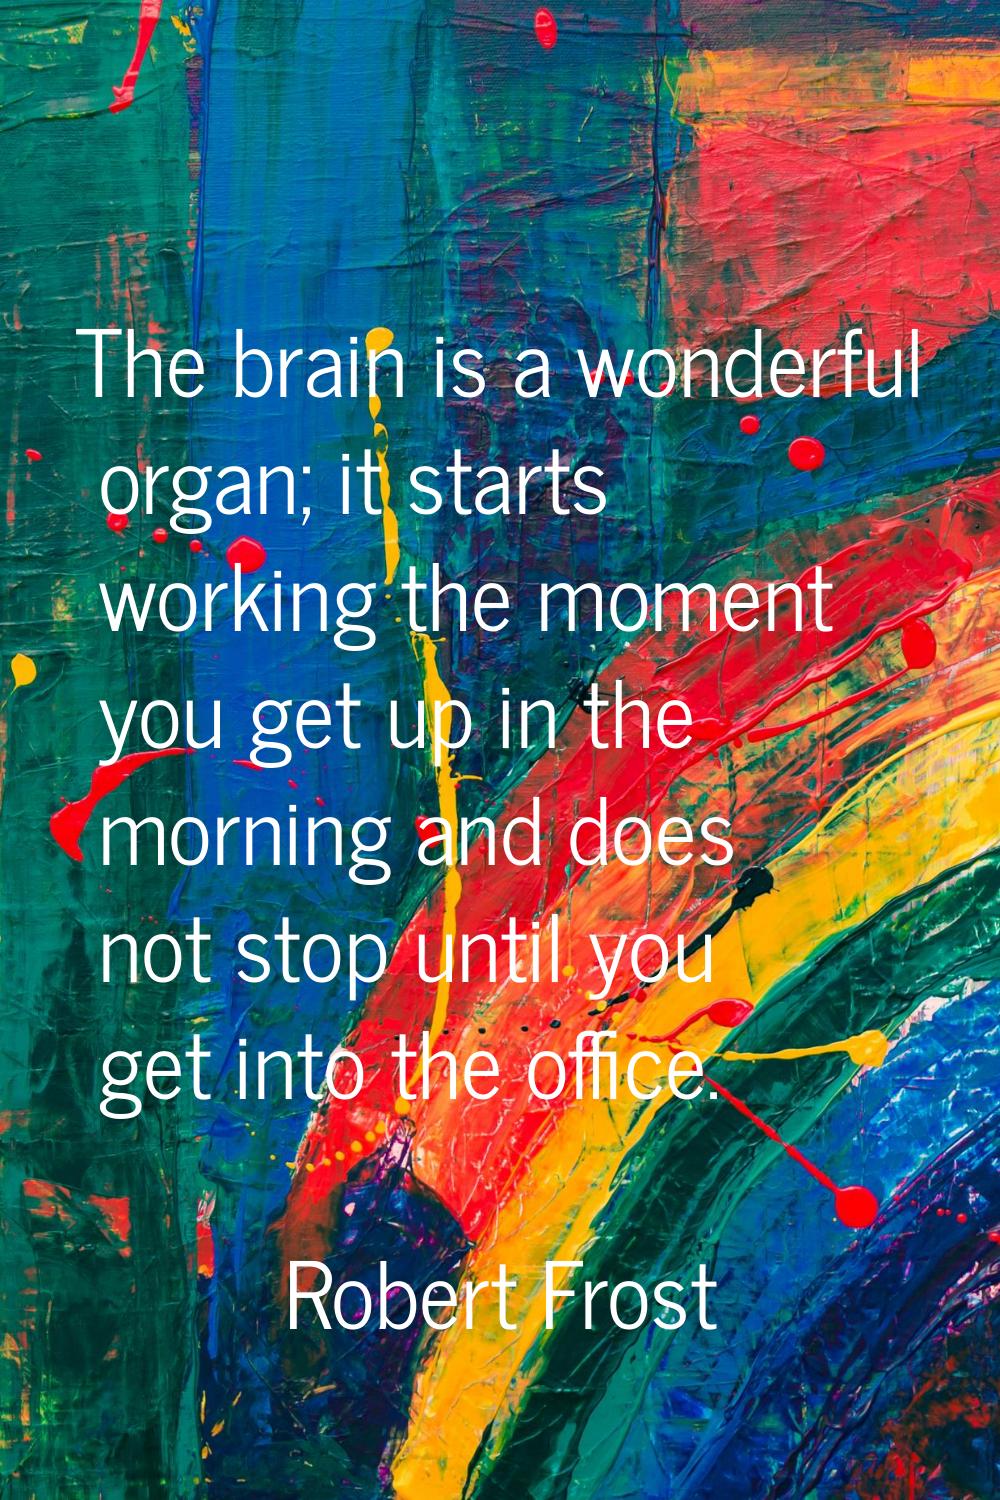 The brain is a wonderful organ; it starts working the moment you get up in the morning and does not